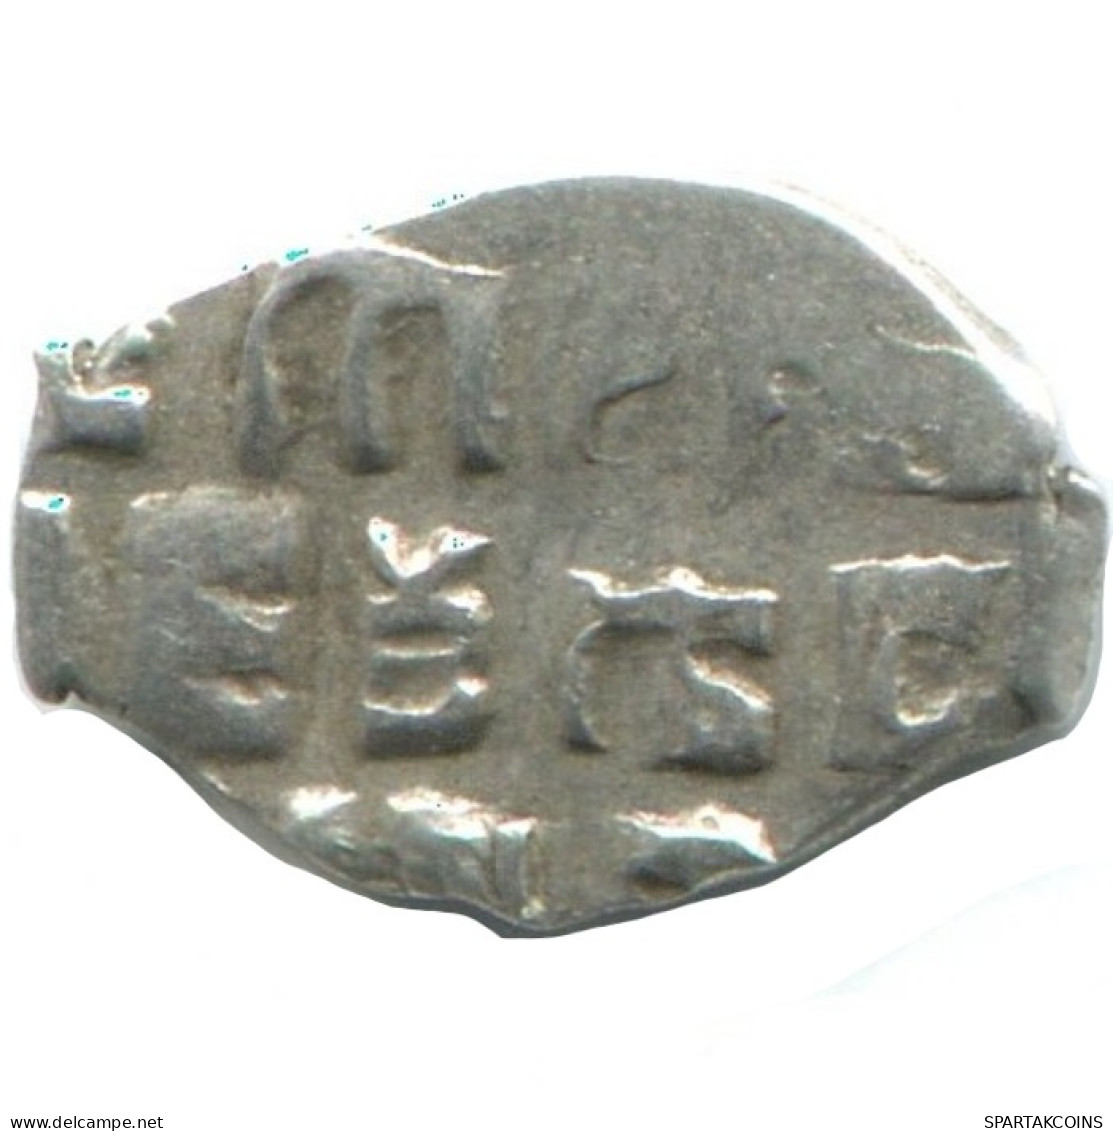 RUSSLAND RUSSIA 1696-1717 KOPECK PETER I SILBER 0.4g/8mm #AB995.10.D.A - Russie